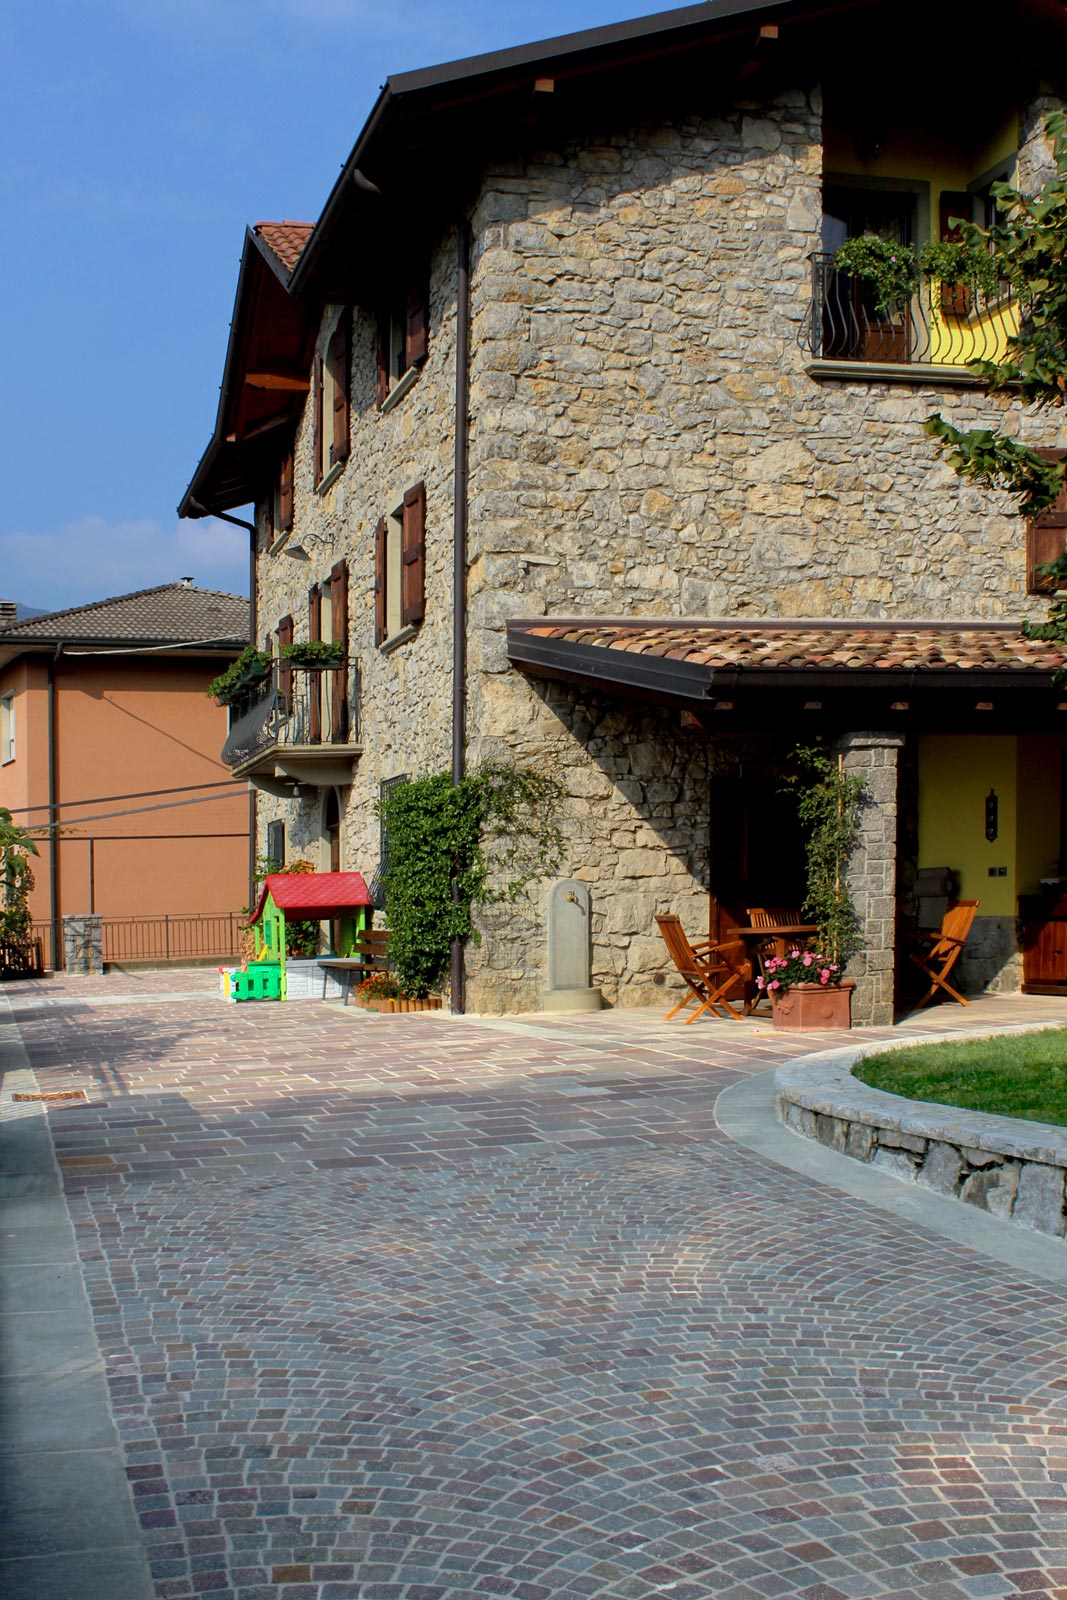 [27] Intorno ad antiche pietre - homes, porphyry, quartzarenite, grey and purple porphyry, grey quarzarenite, stone paving, pavé, stairs, ramps accessible by vehicles